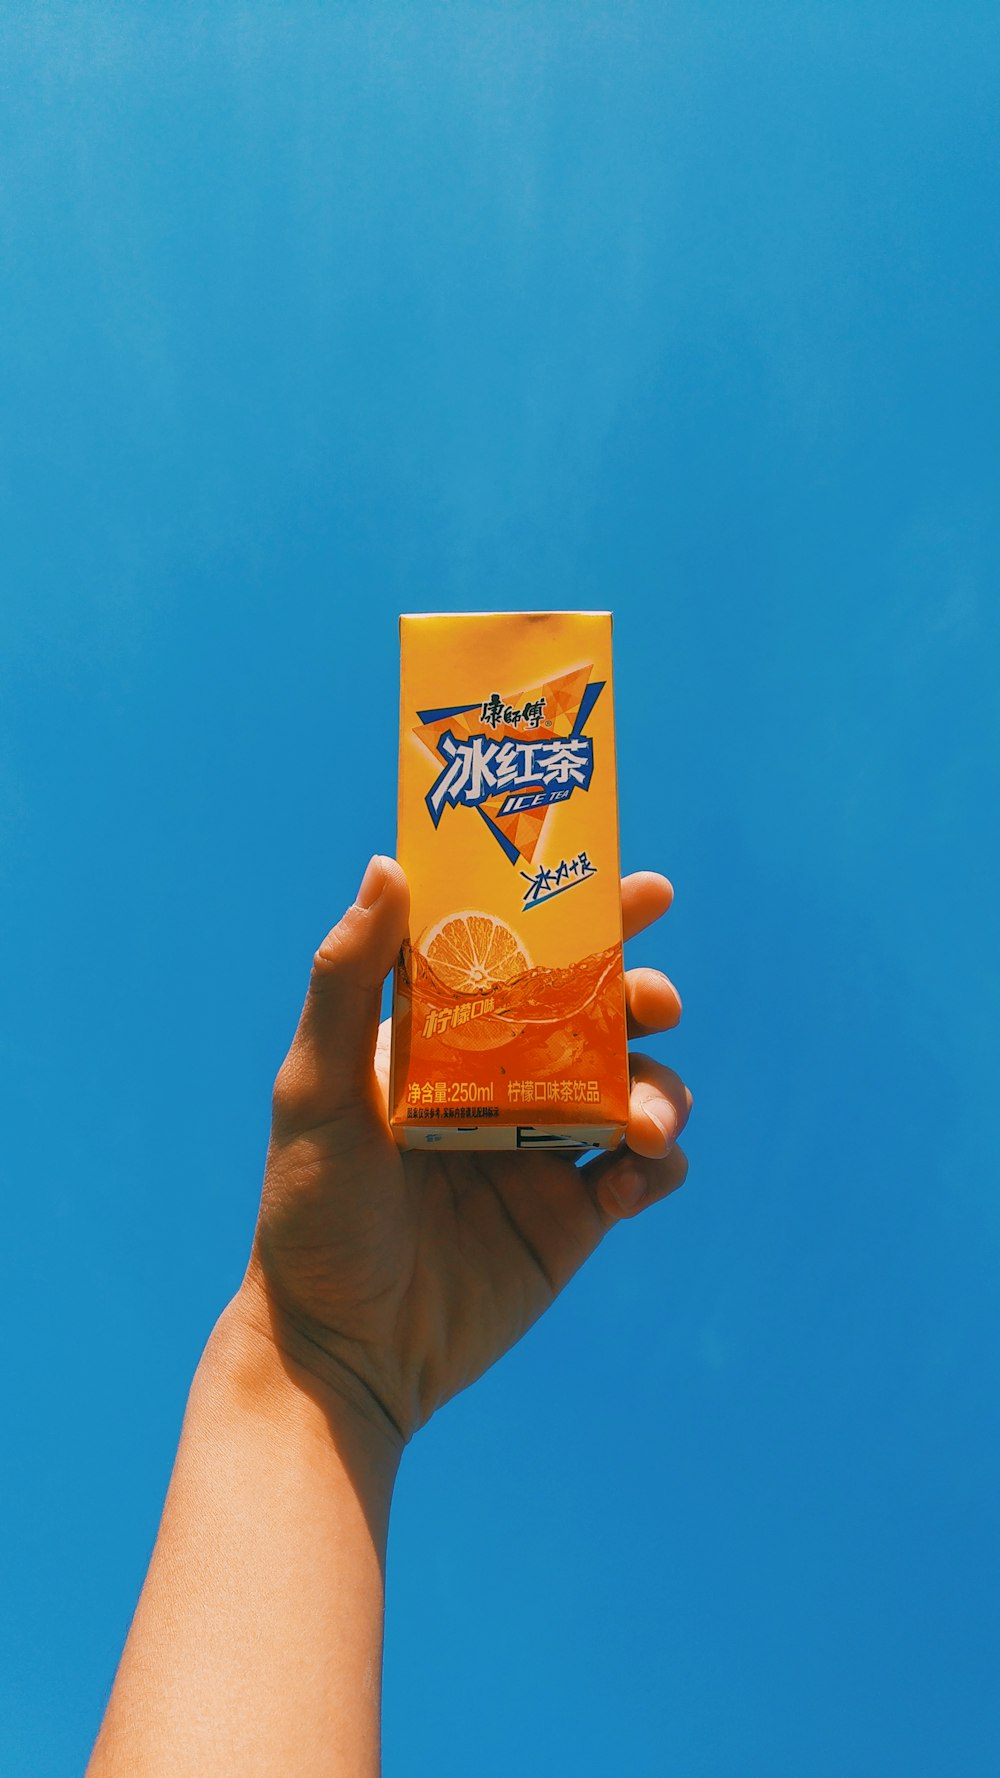 a hand holding a box of orange juice